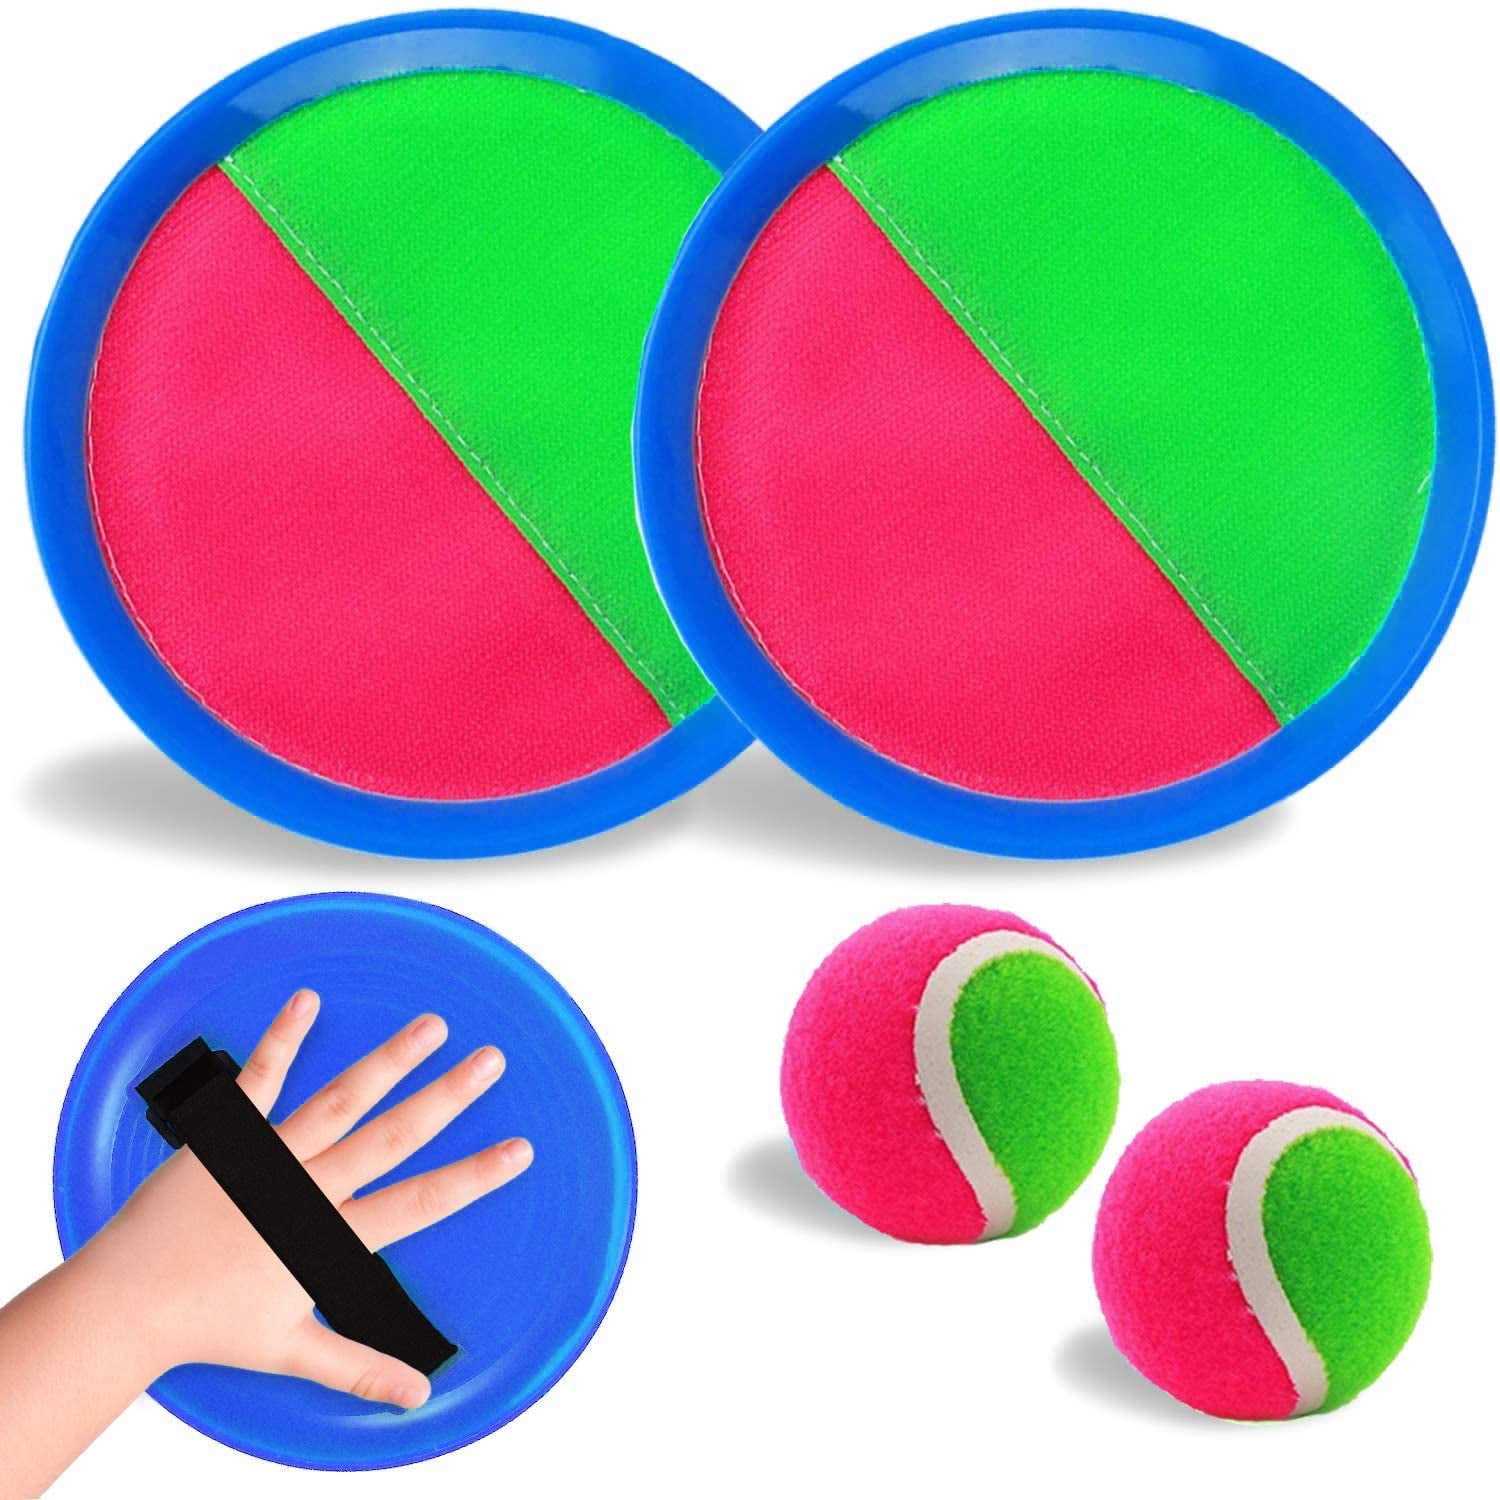 Toss and Catch Ball Set,Kids Toys Toss and Catch Game Set,Beach Toys Classic Outdoor Games,Yard Games Suitable for Kids/Adults/Family,6 Paddles and 3 Balls 